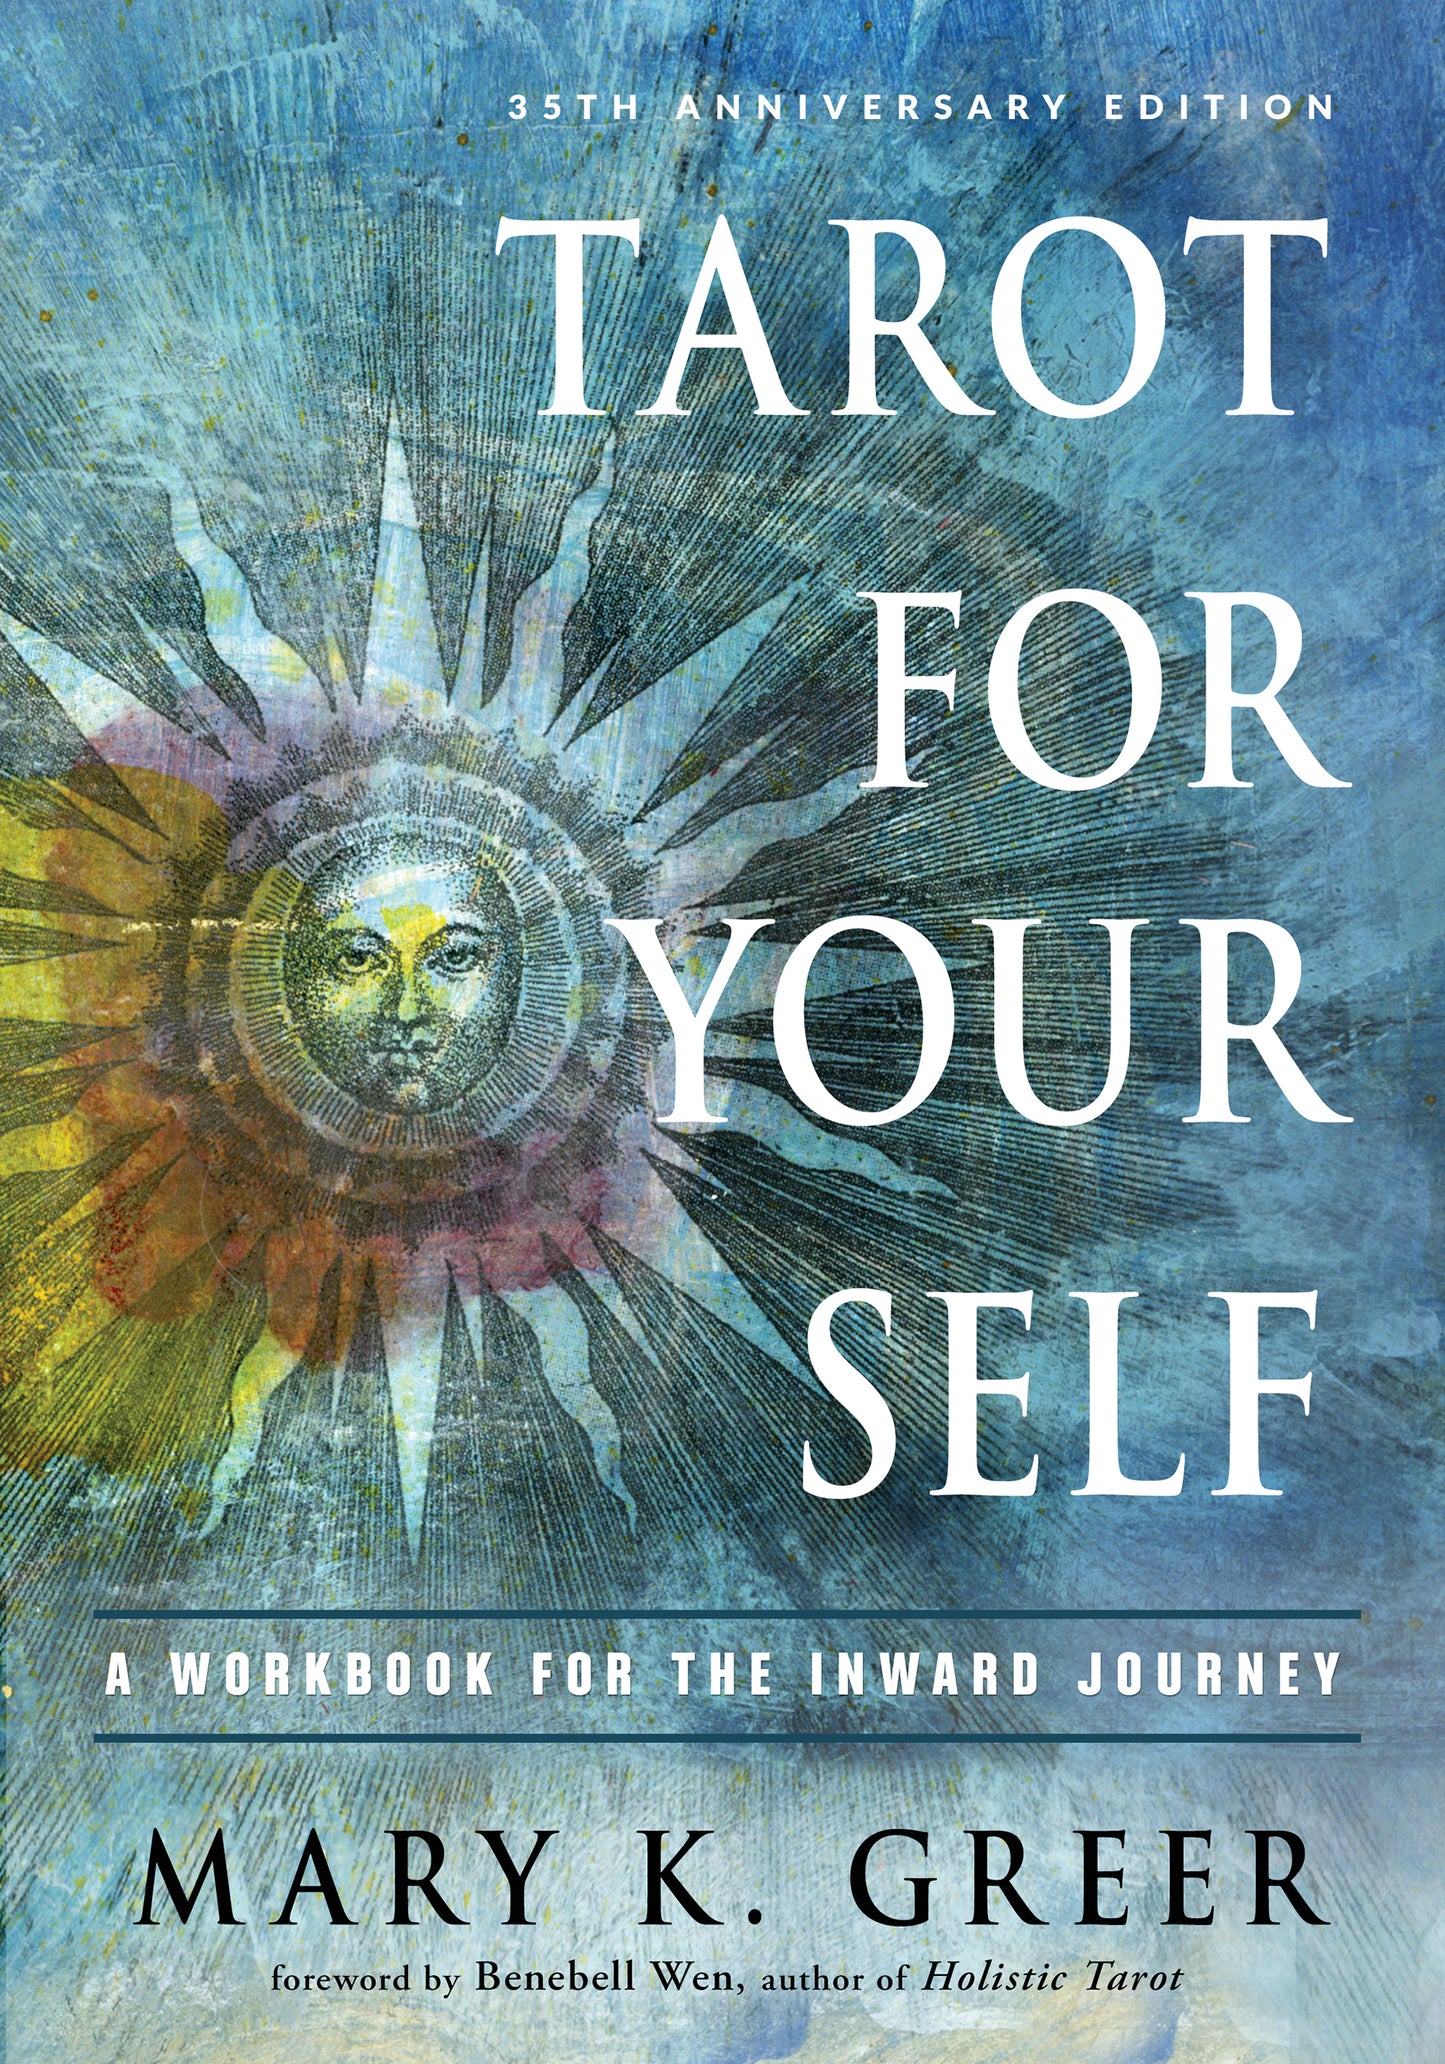 Tarot For Your Self: A Workbook for the Inward Journey by Mary Greer